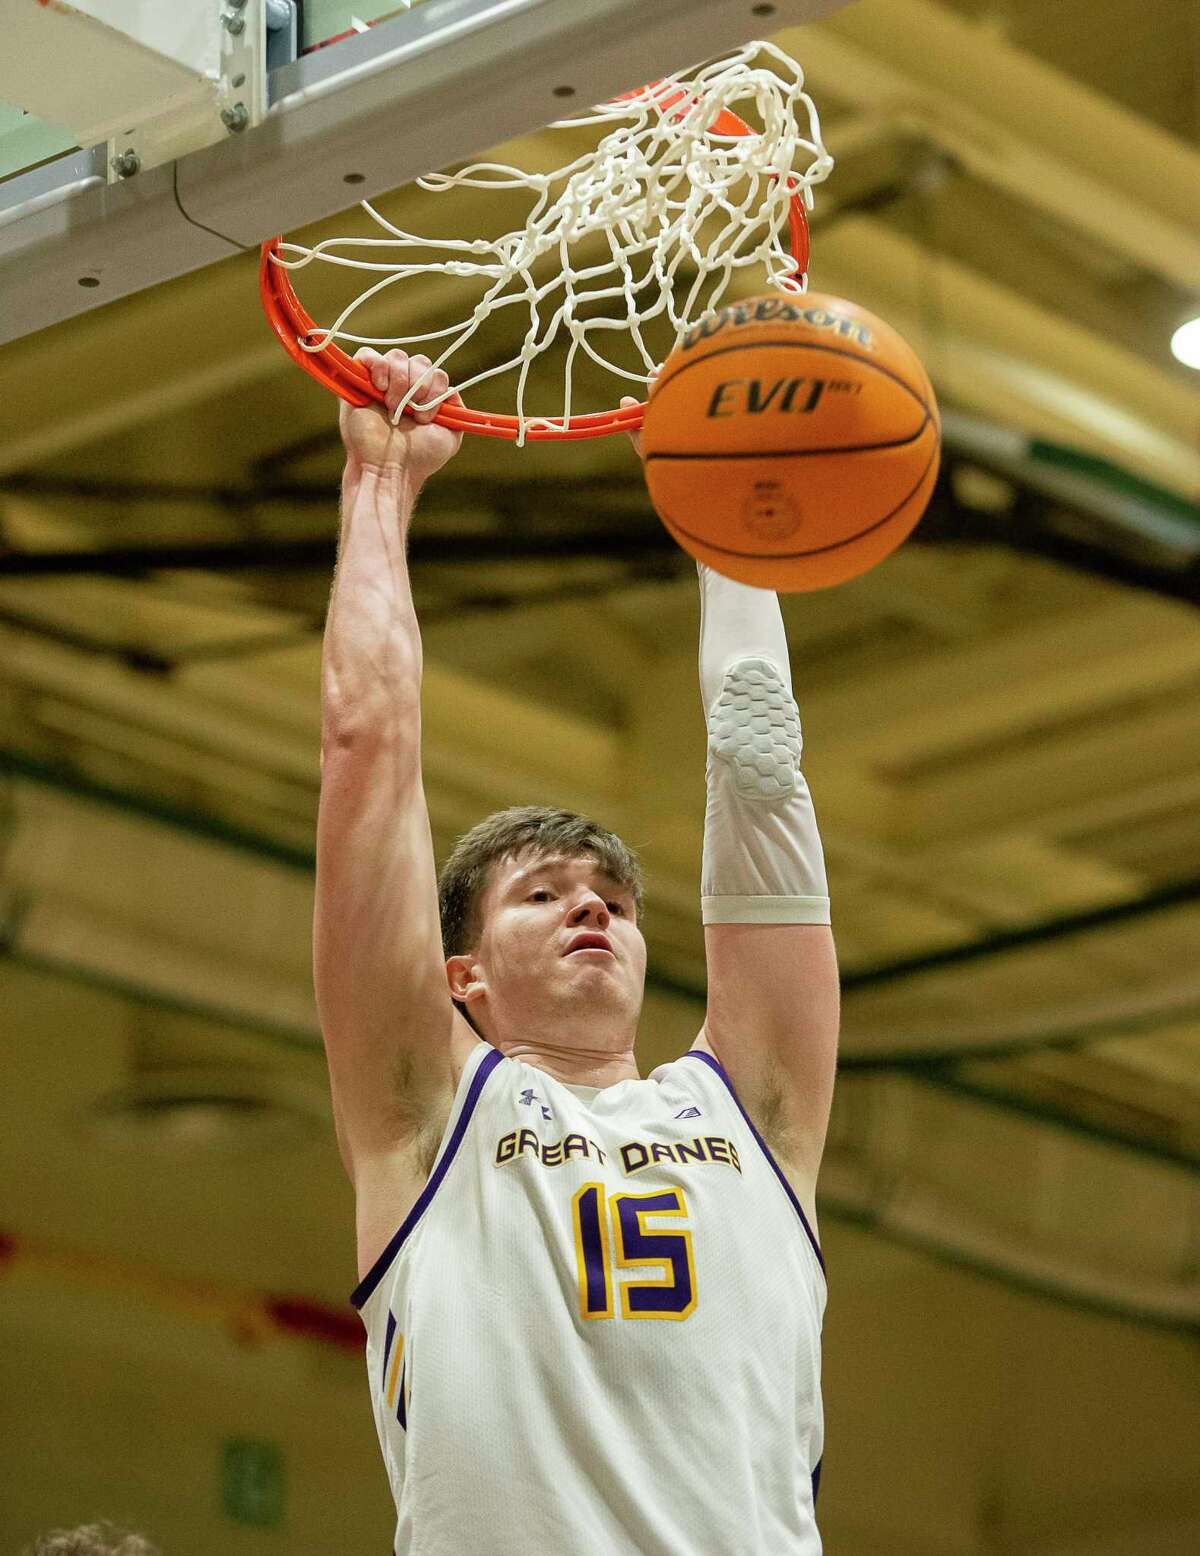 Albany’s Jonathan Beagle dunks the ball during a game against Maine at McDonough Sports Complex in Troy, N.Y. on Saturday, Jan. 28, 2023. (Jenn March, Special to the Times Union)